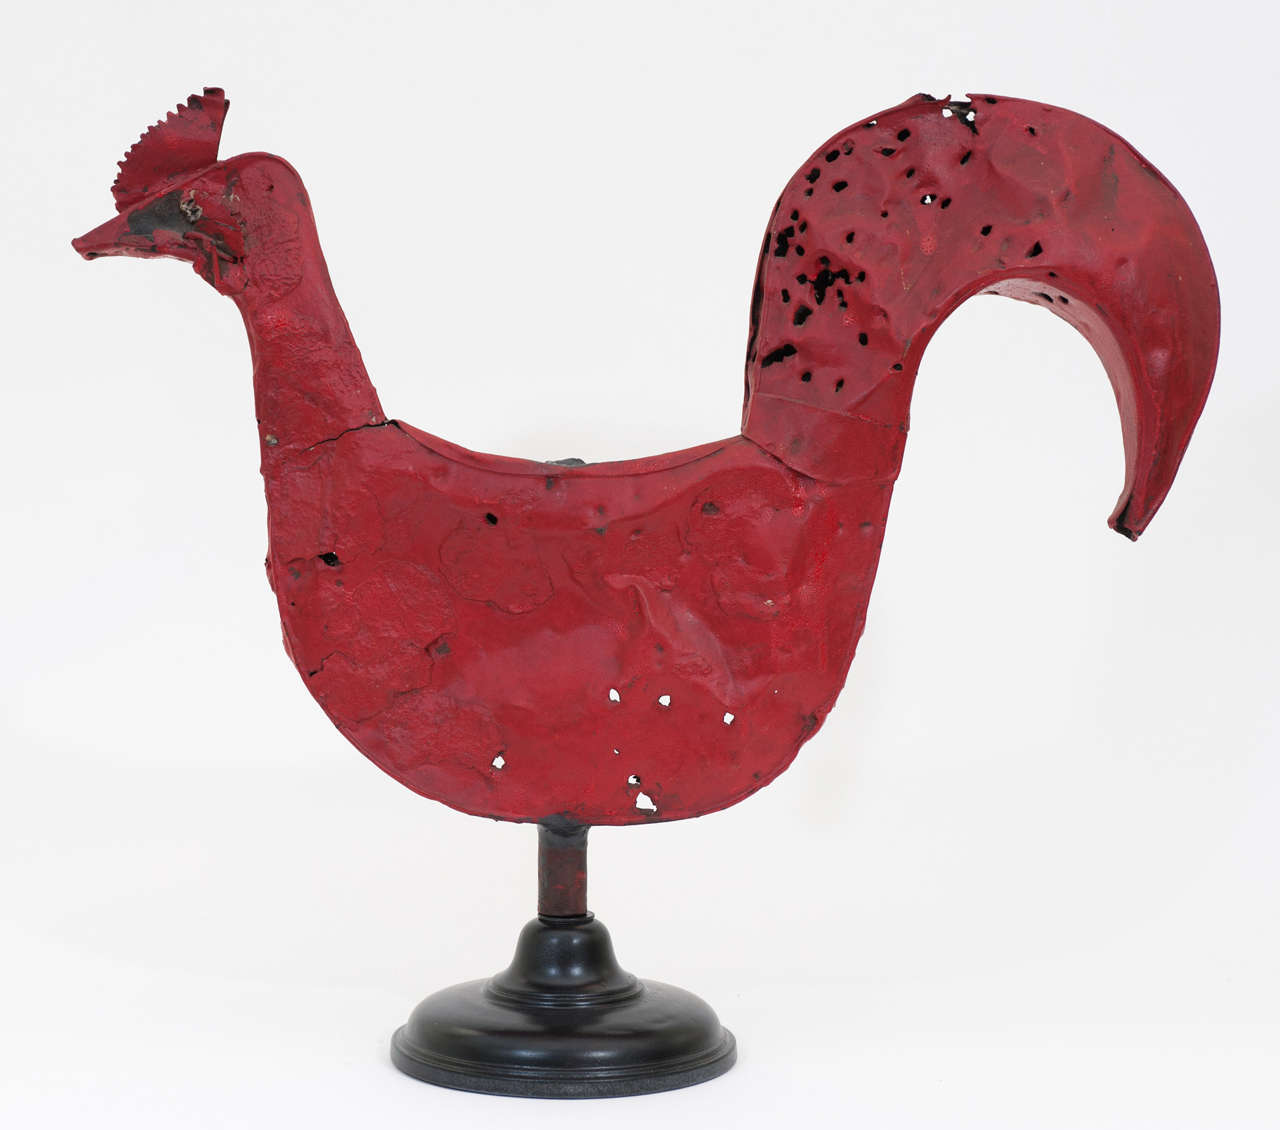 An authentic Quebec  rooster weathervane in original red paint from
the the Brome Lake region of the Eastern Townships. This rare
folk art weather vane has been in the same household for over 50 years. It is mounted on a stand but it can be easily